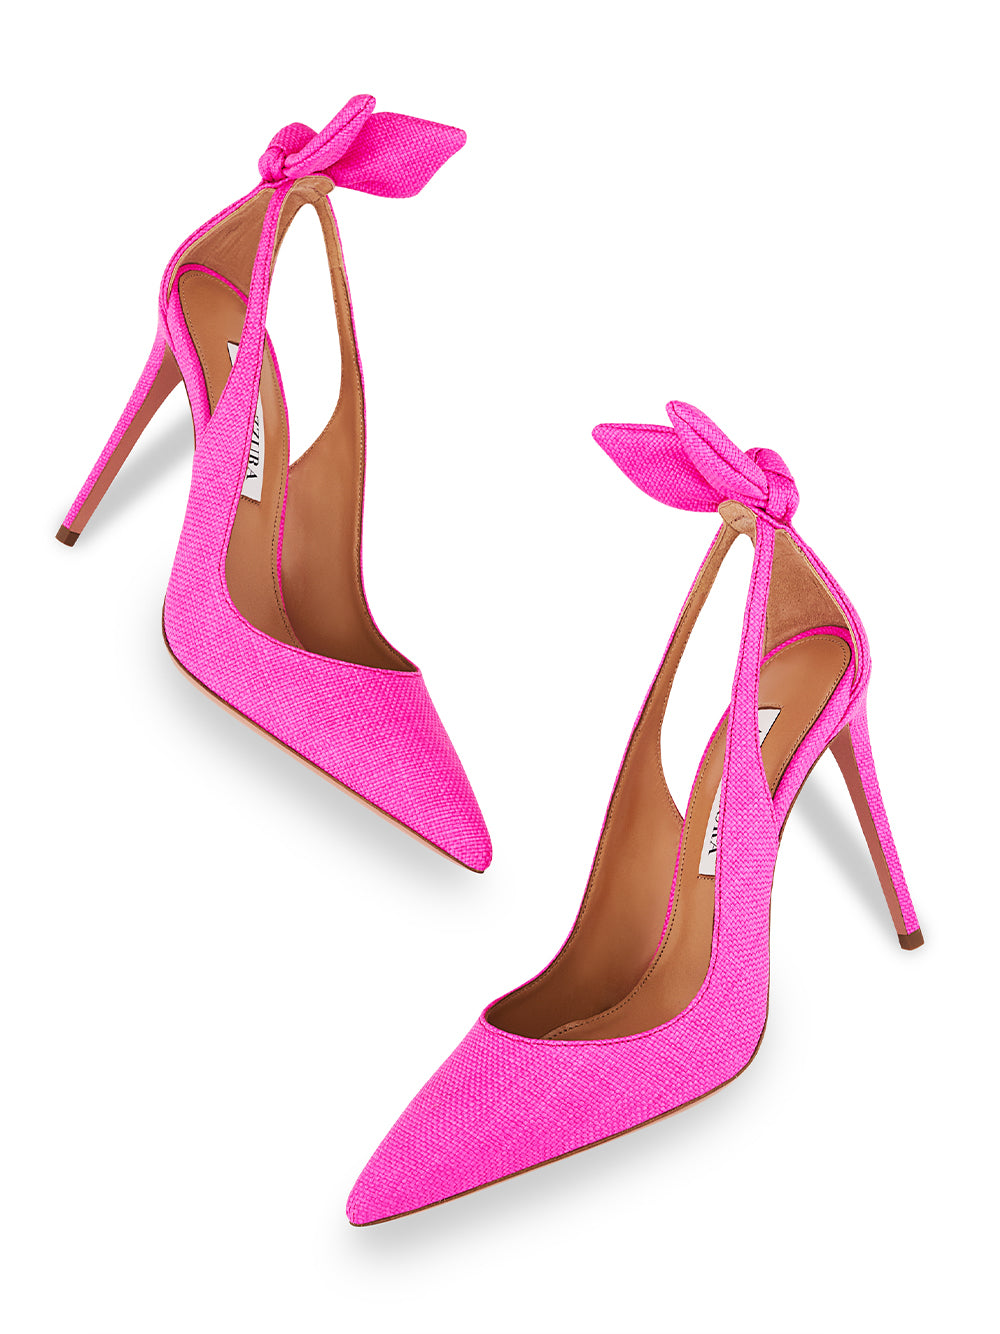 Bow Tie Pumps 105 (Ultra Pink)